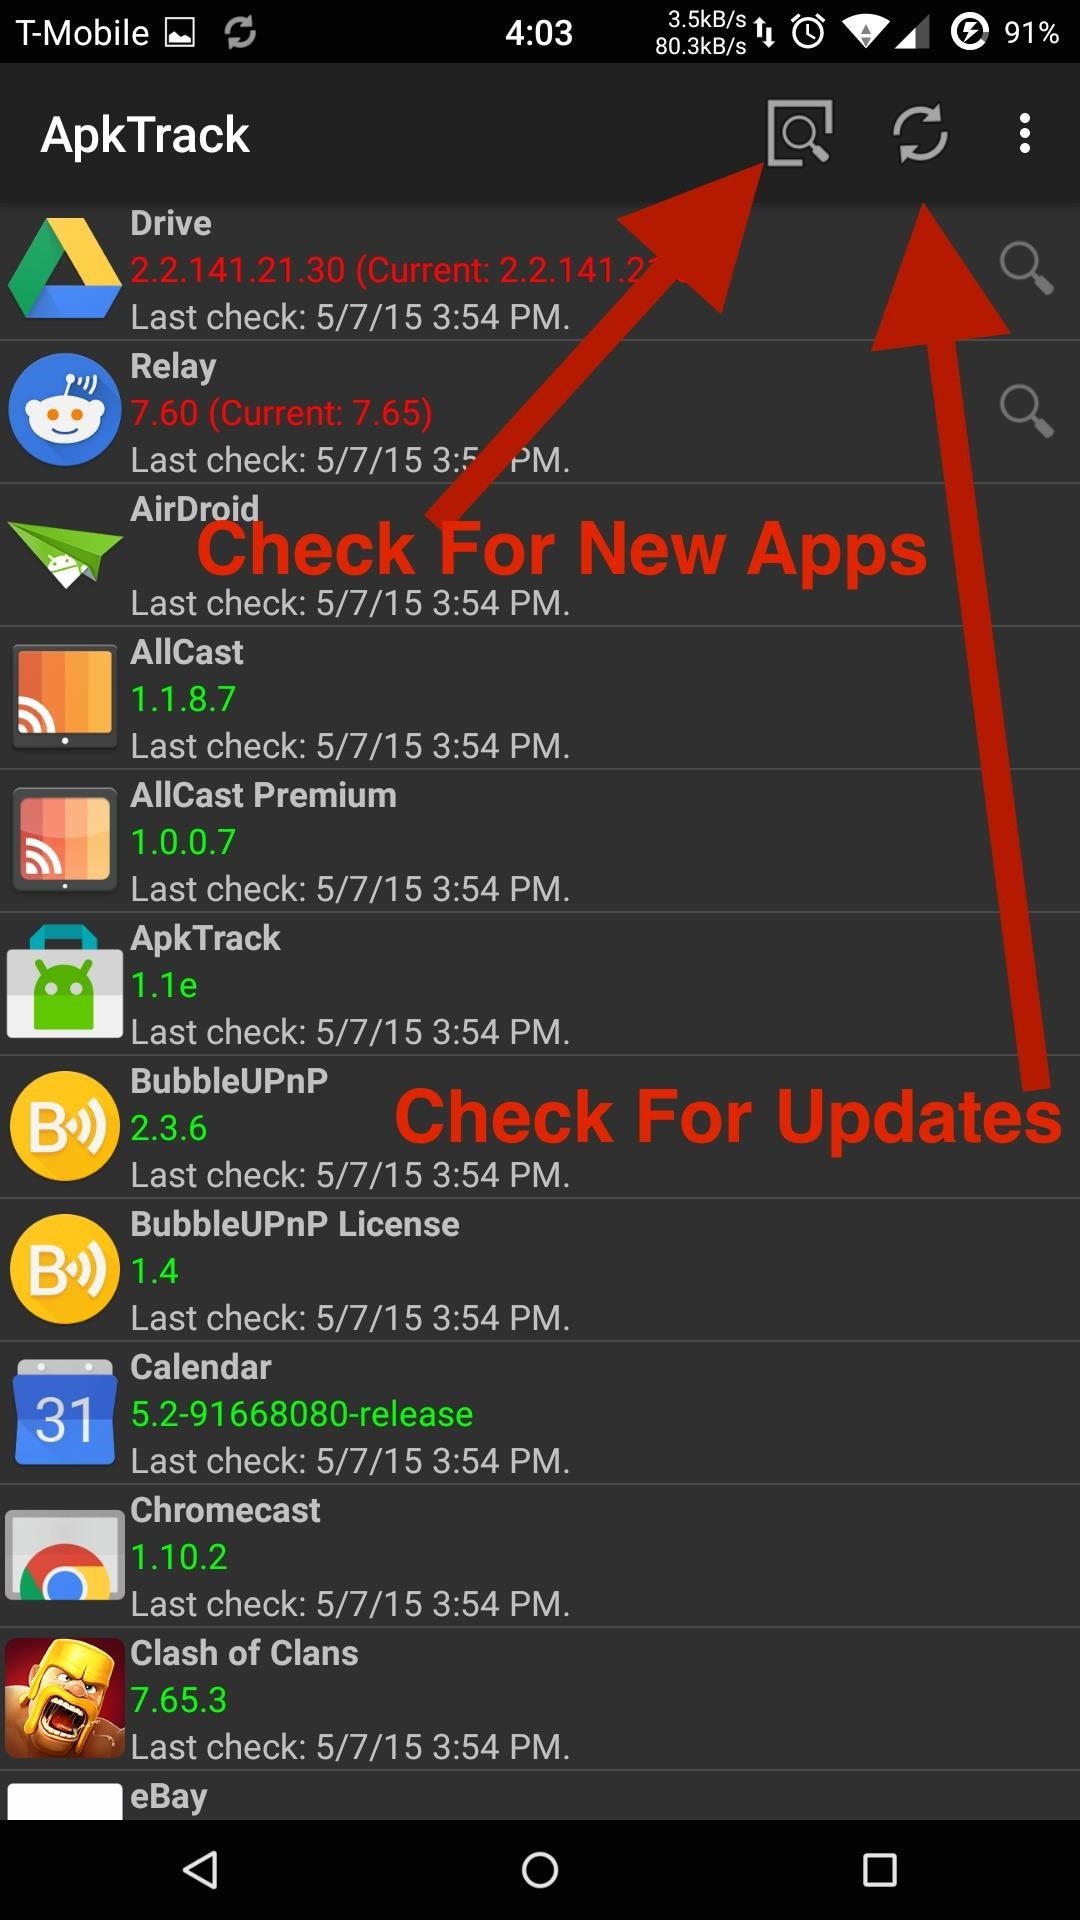 Find Updates for Non-Play Store Apps on Android More Easily with ApkTrack